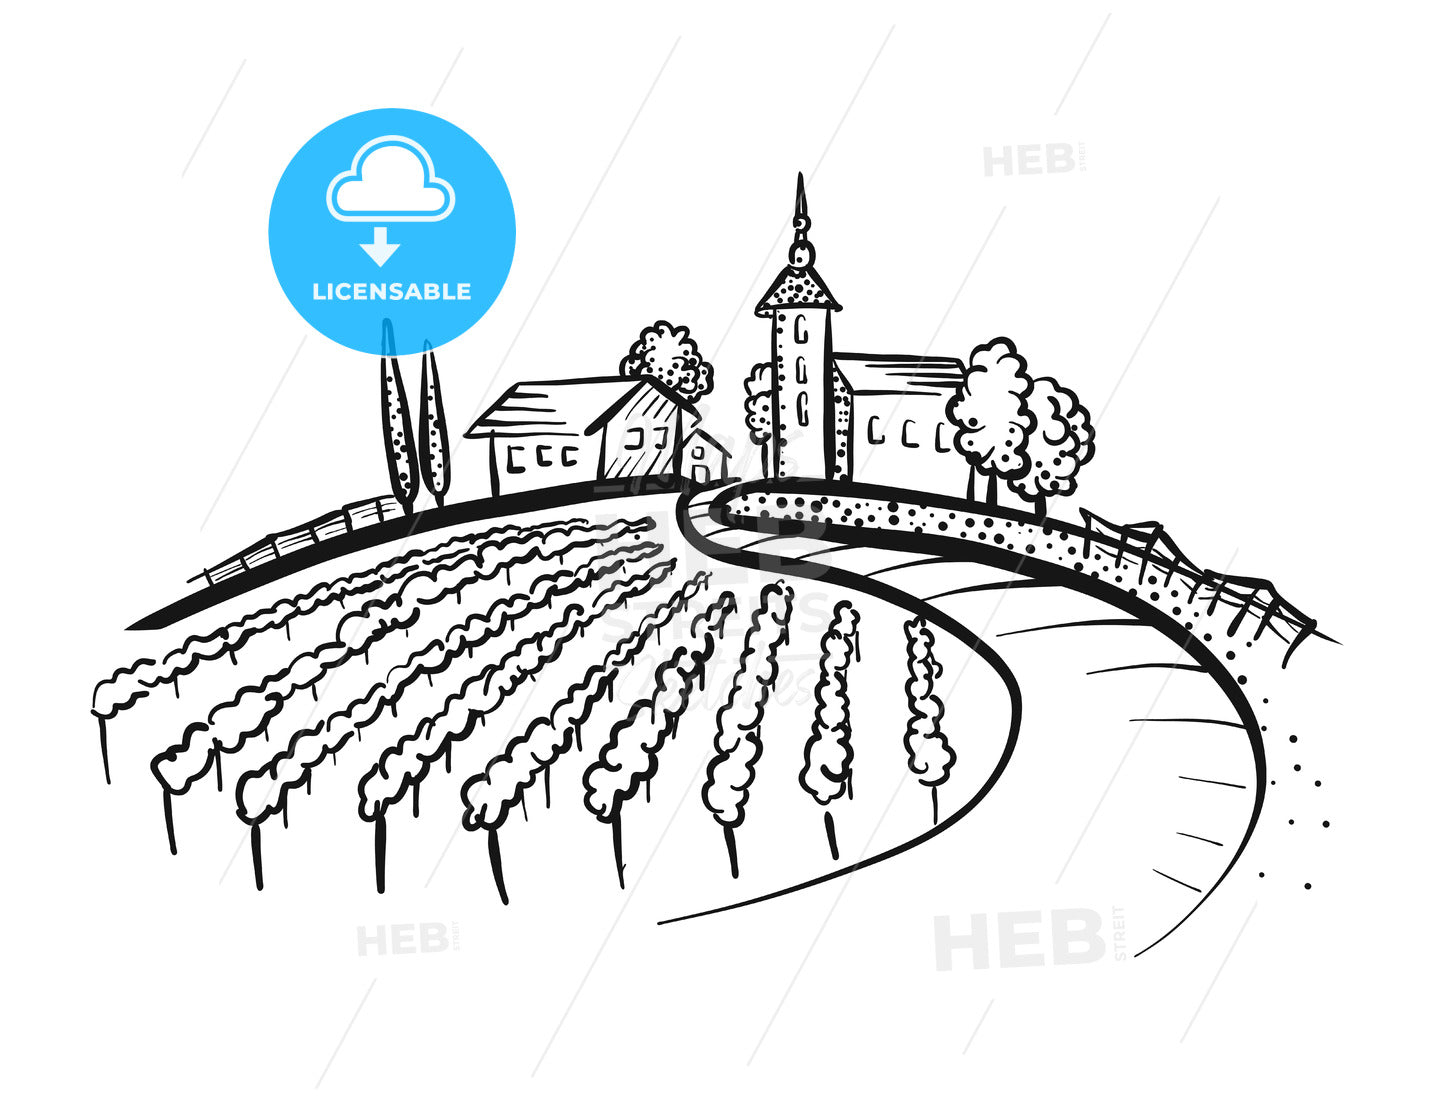 Vineyard Drawing with path and houses on hill – instant download